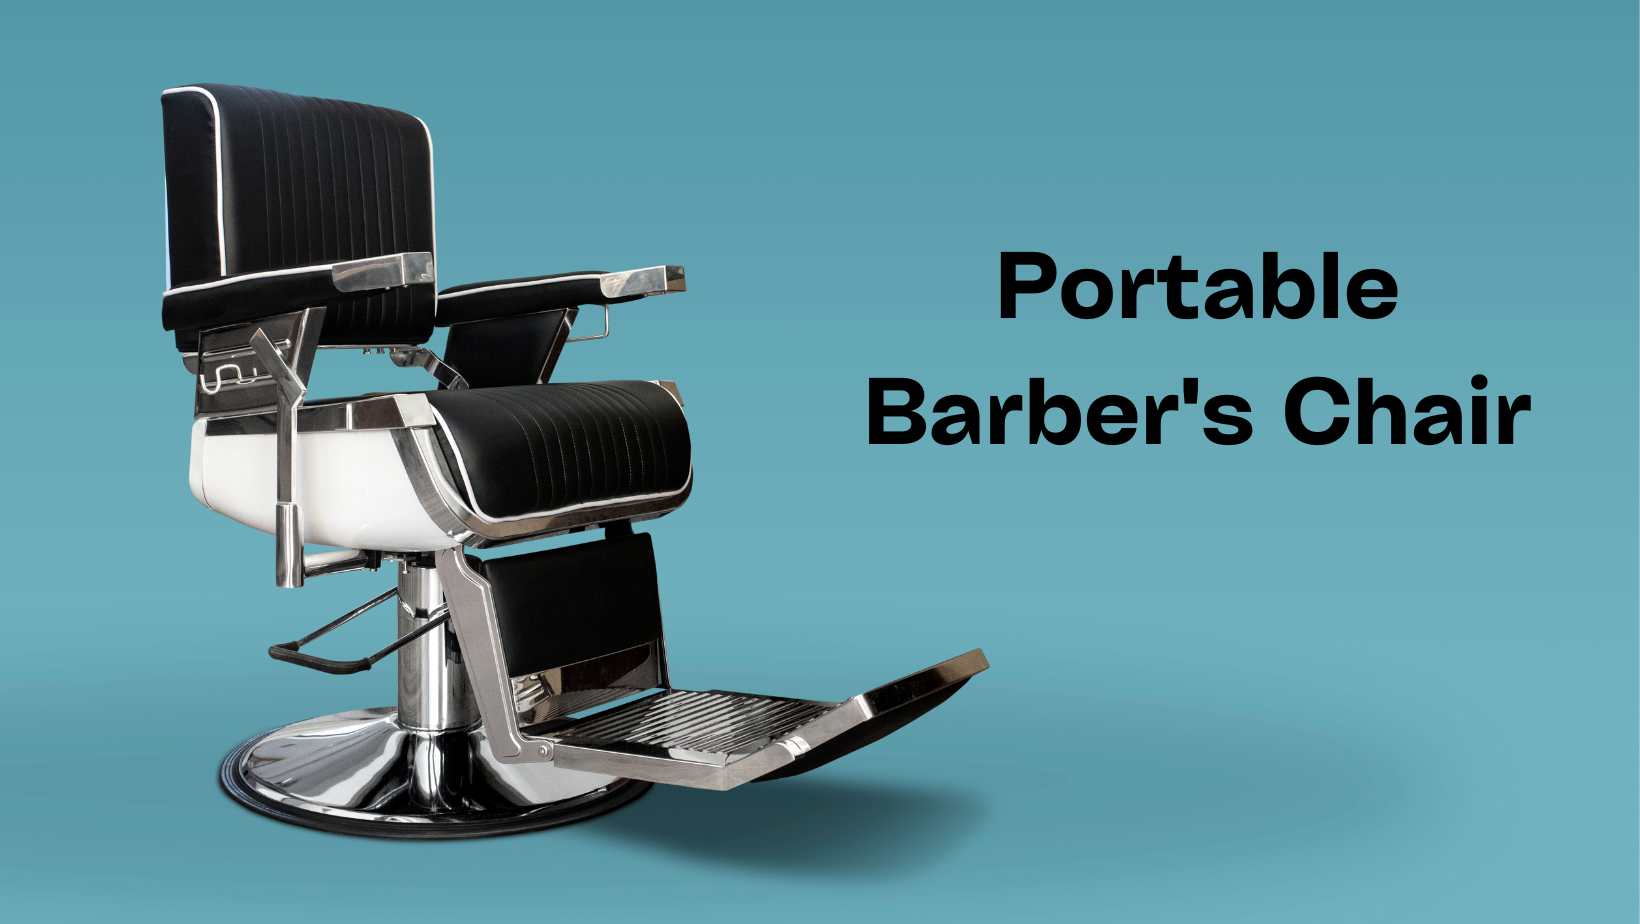 What To Look For When Buying A Barber Chair?